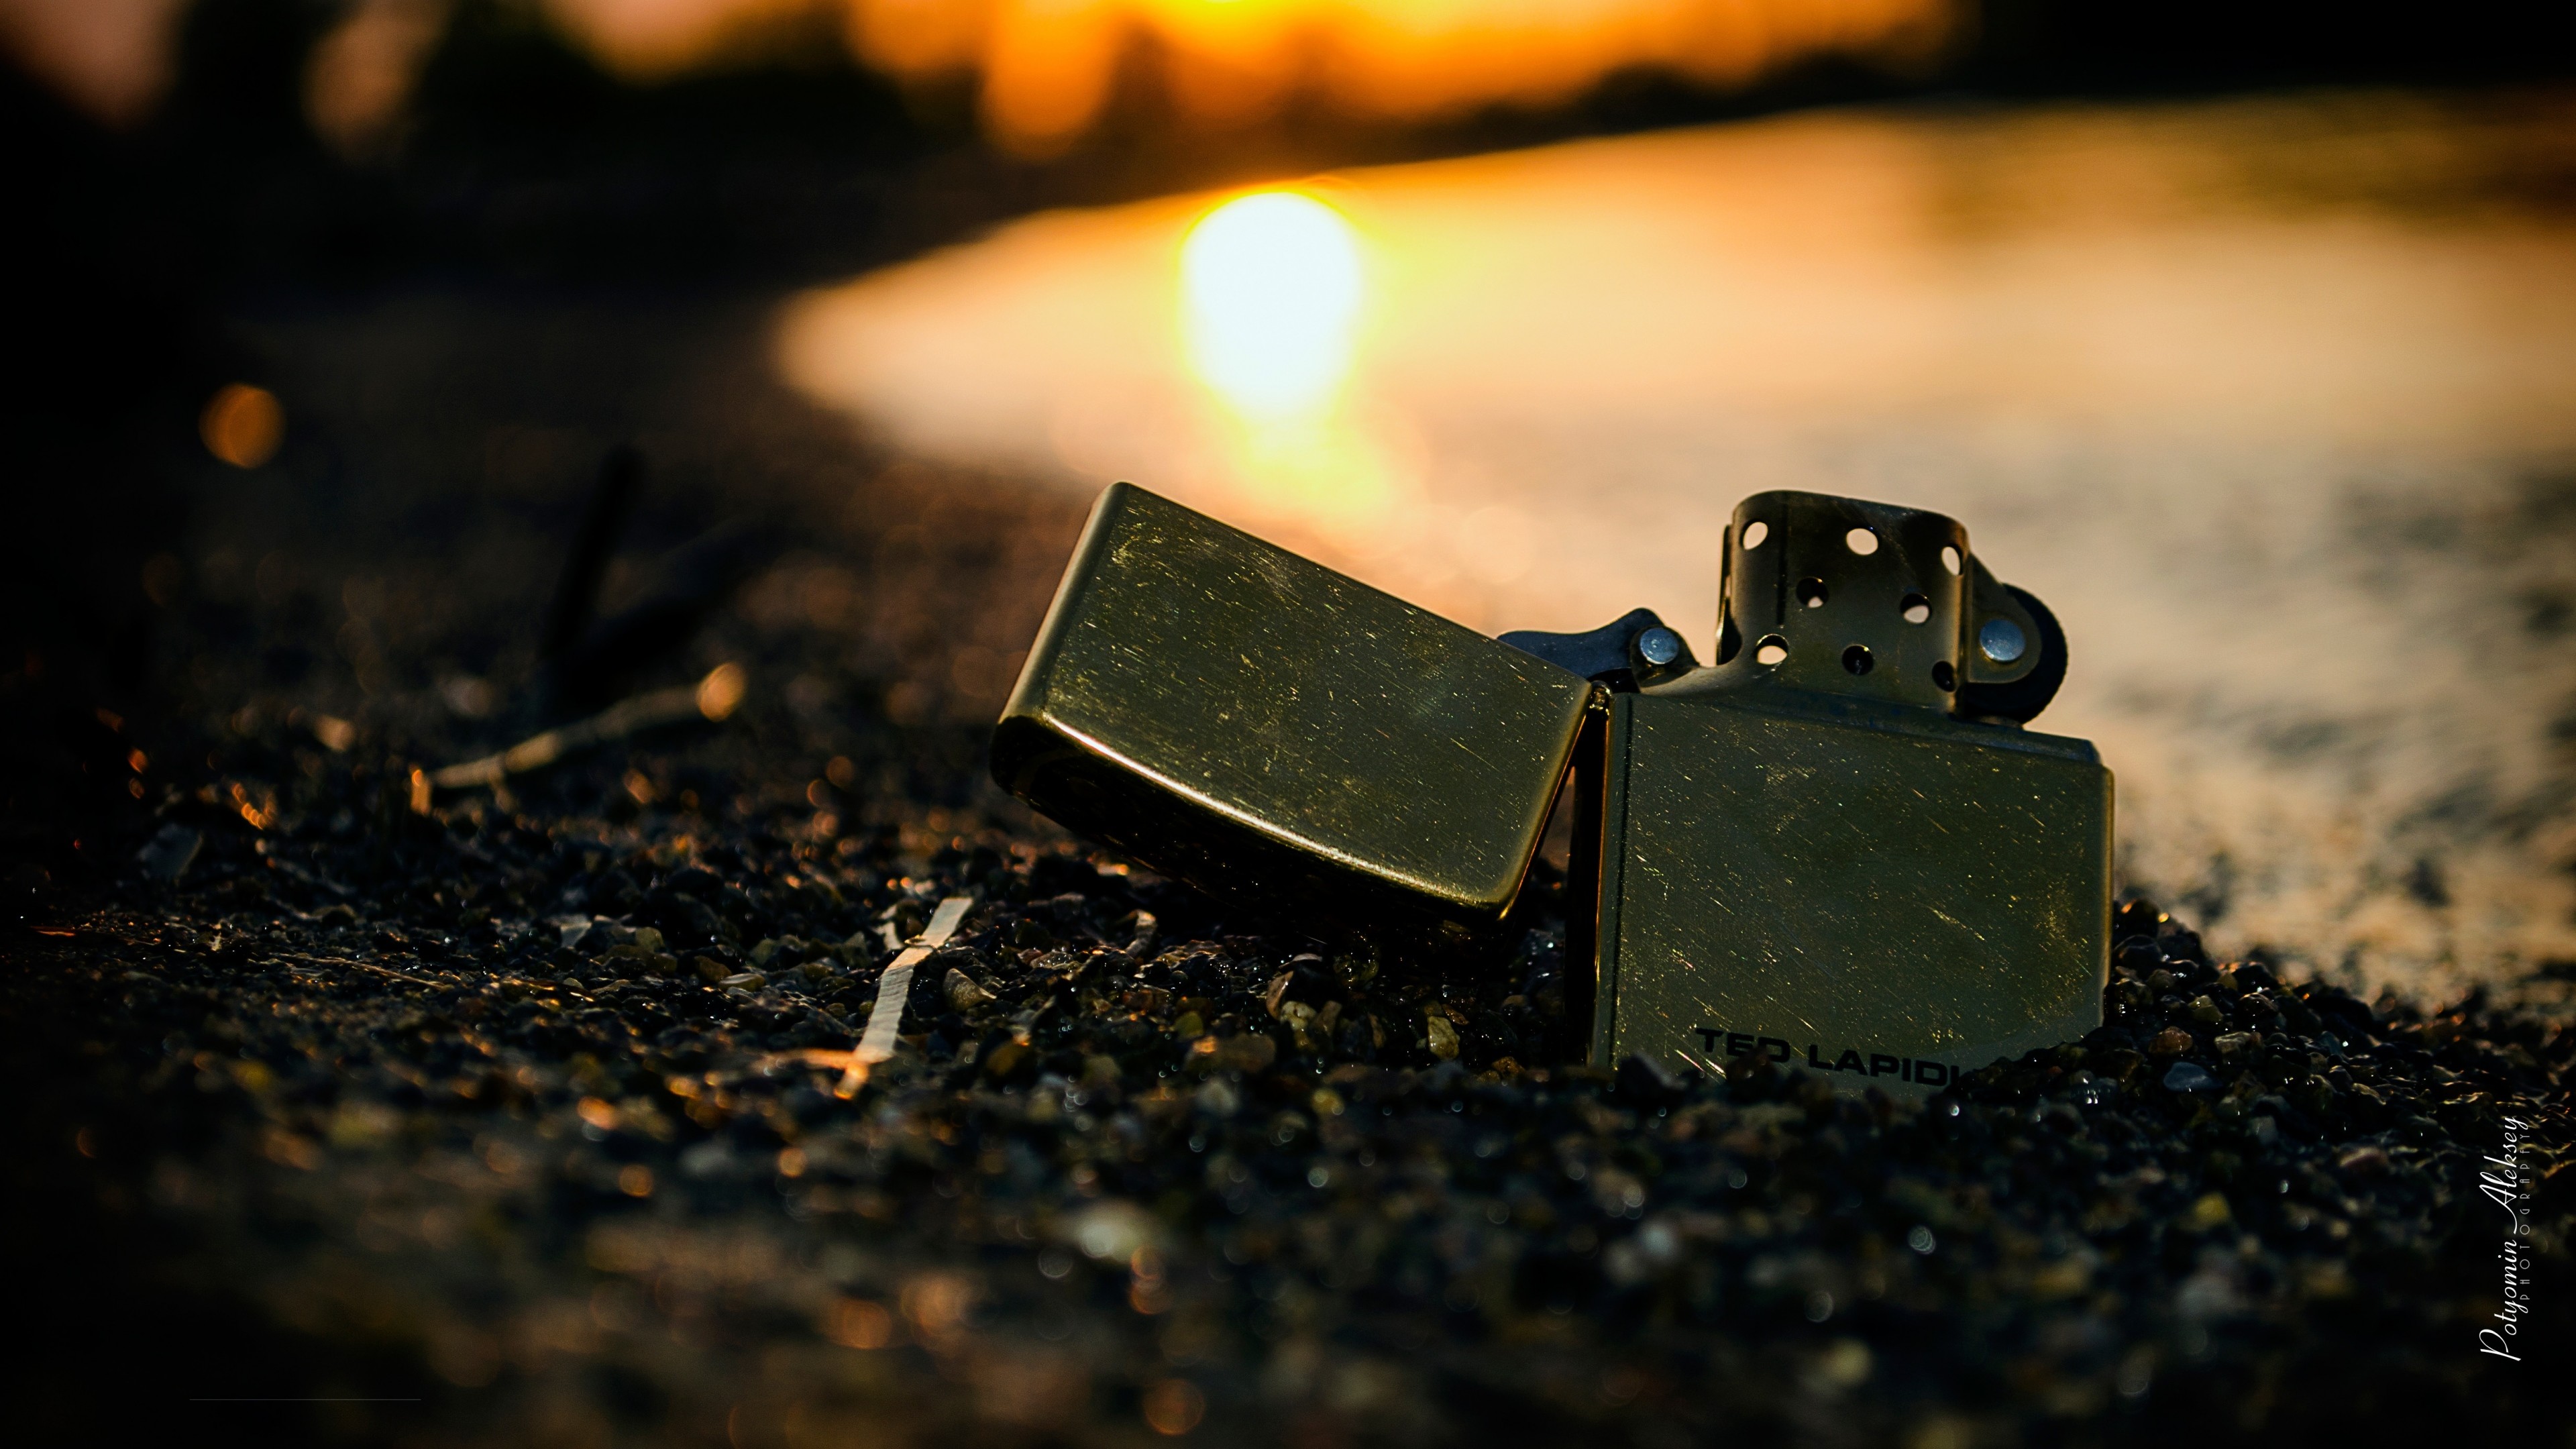 Full HD Wallpaper Of Zippo Lighters The Best Image In